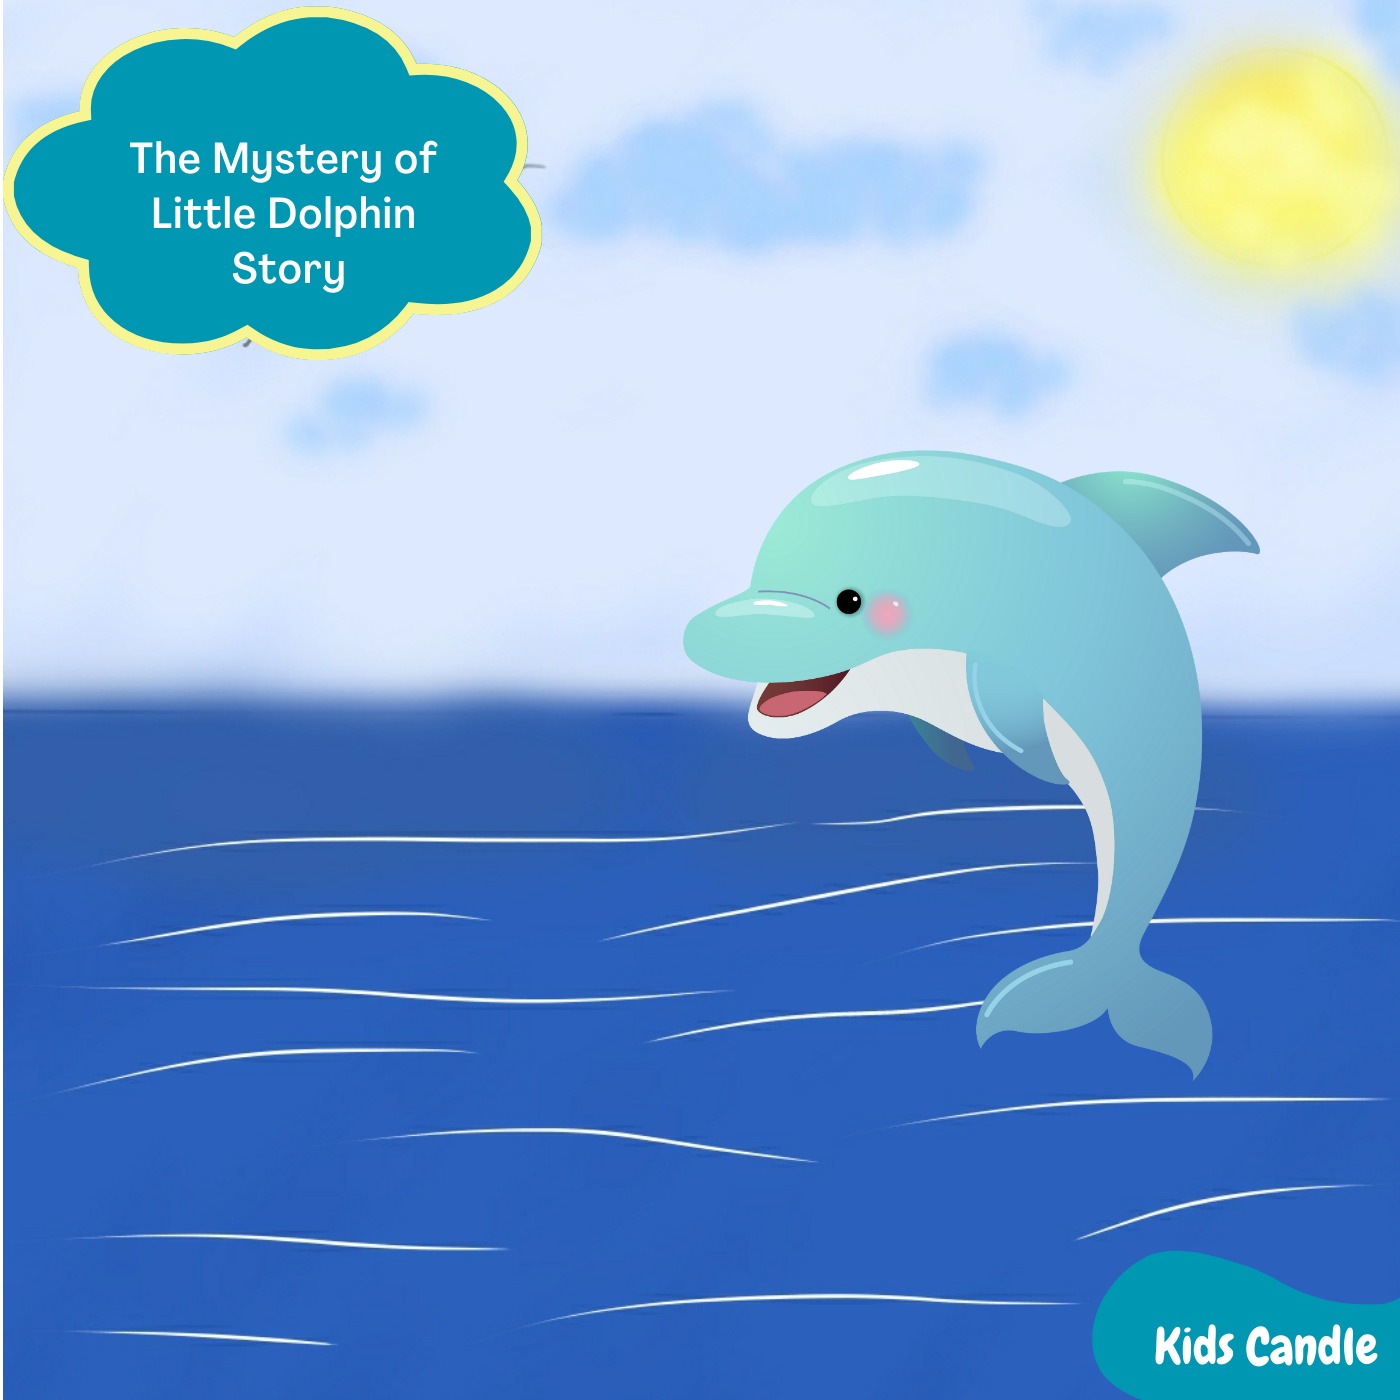 The Mystery of Little Dolphin Story